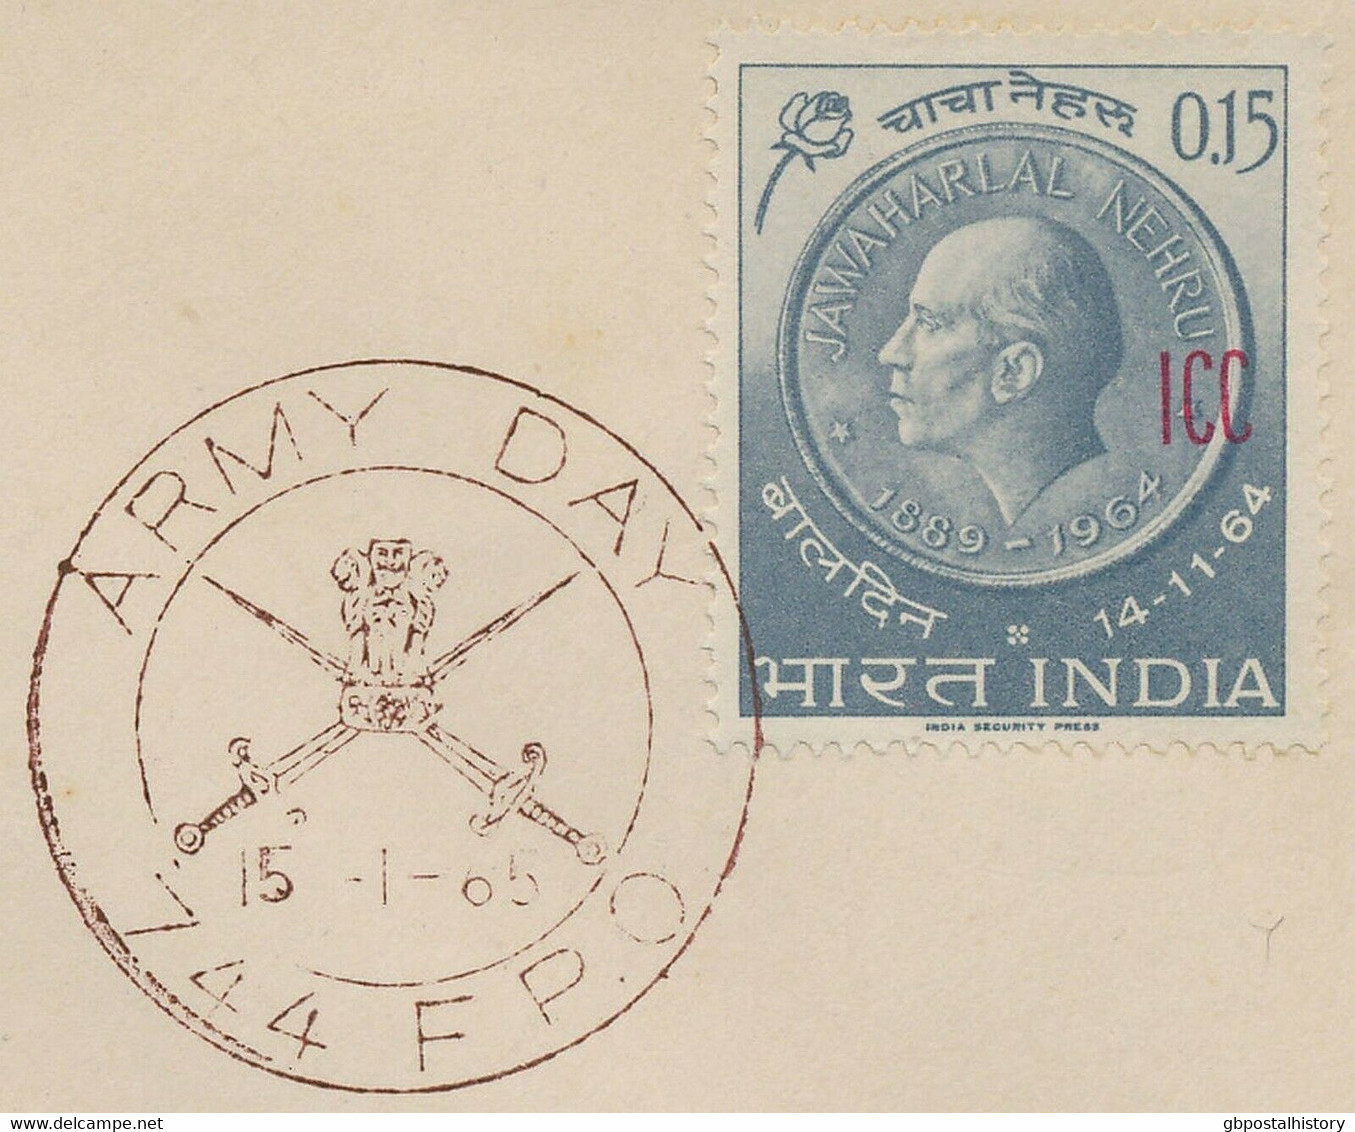 INDIA Indian Police Forces In Laos 1965 Army Day  "ARMY DAY / 744 F.P.O." FDC R! - Franchise Militaire